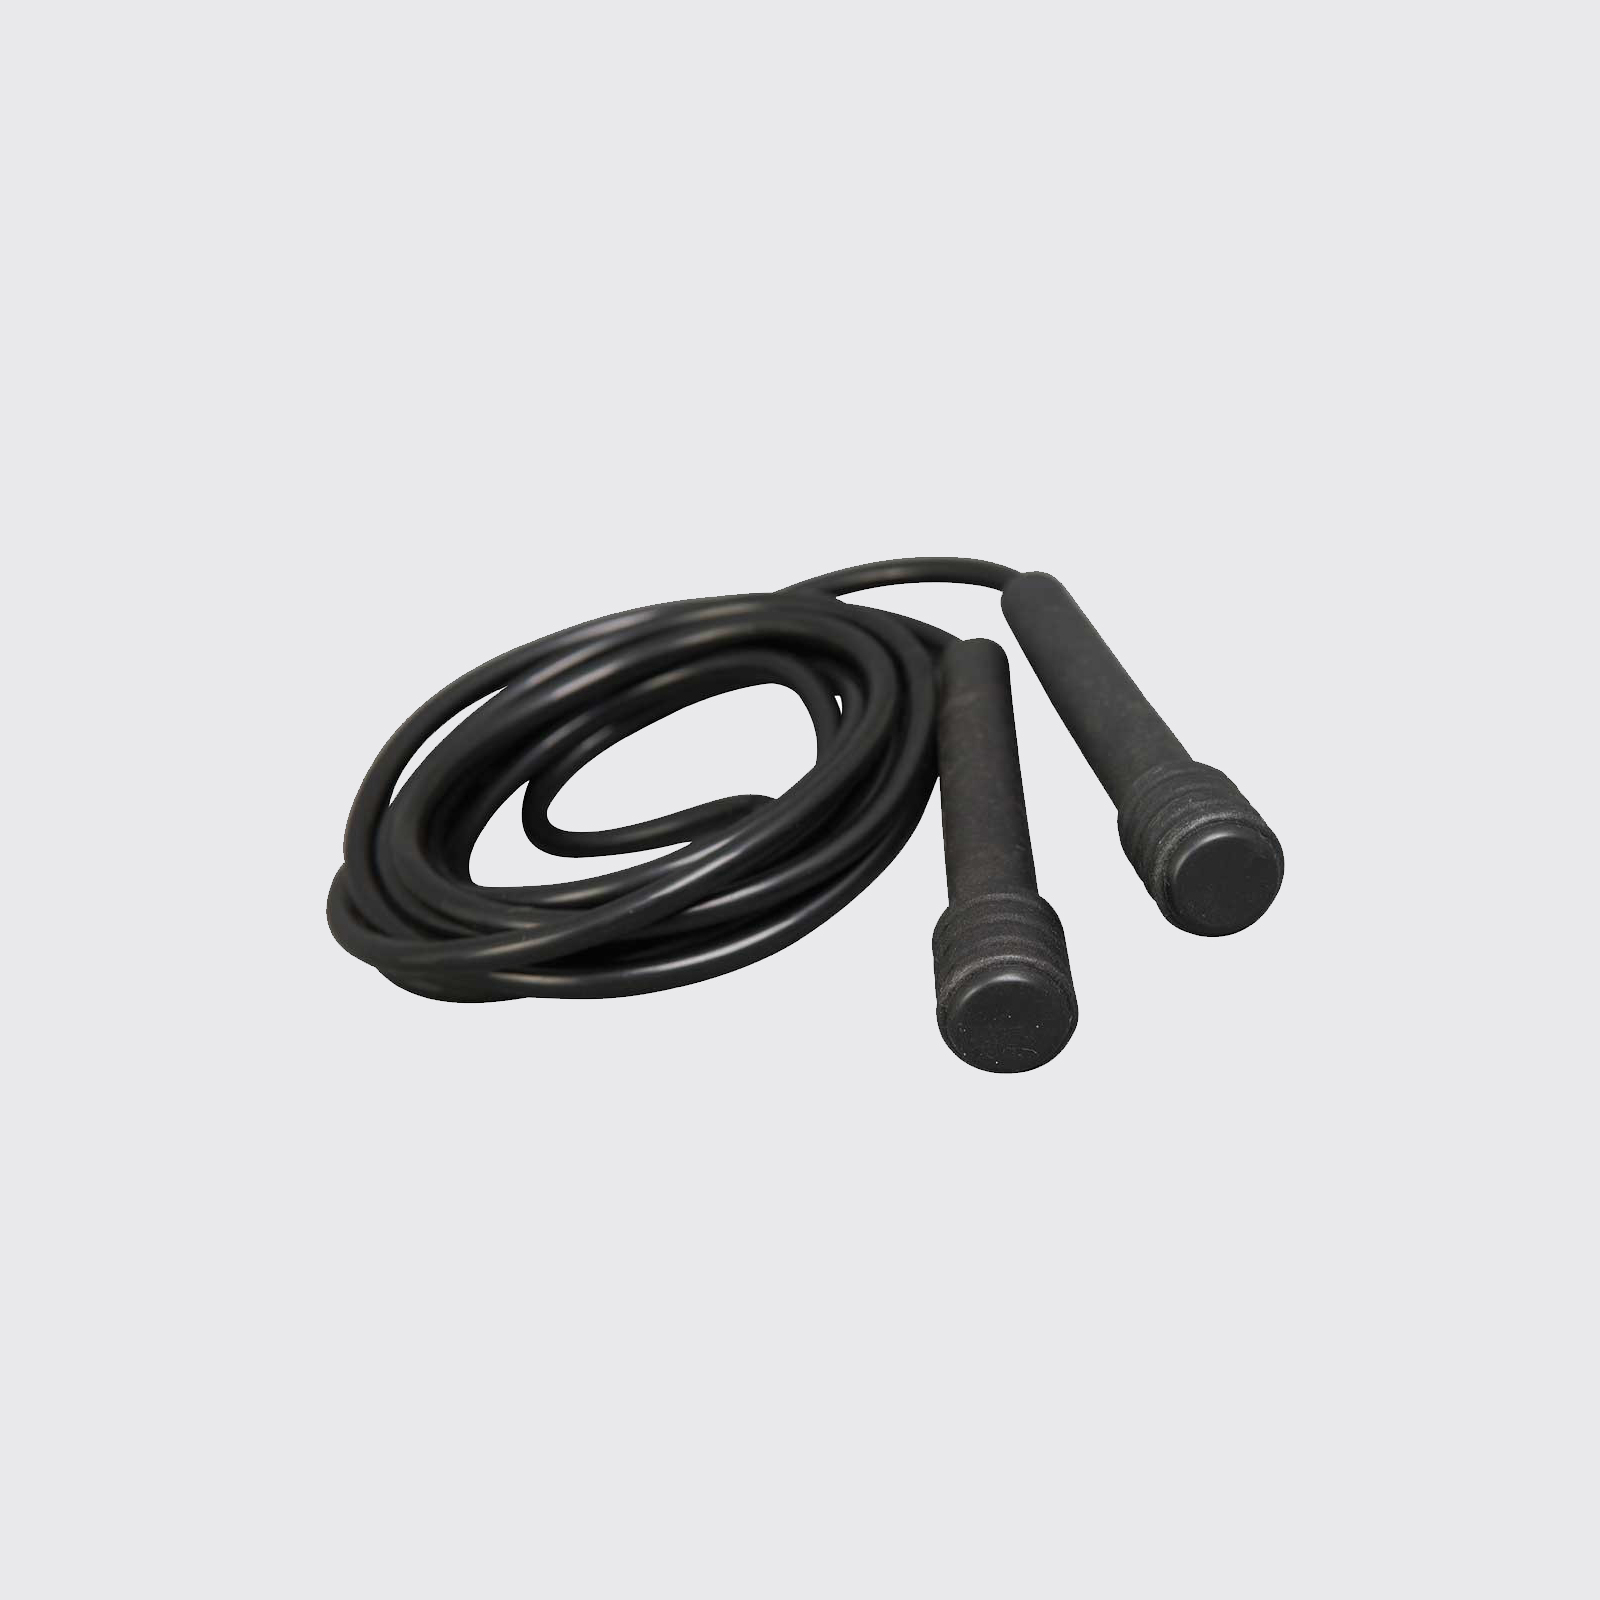 8FT 9FT! Tuf Wear Wire Skipping Rope Boxing Fitness Training Black 7FT 